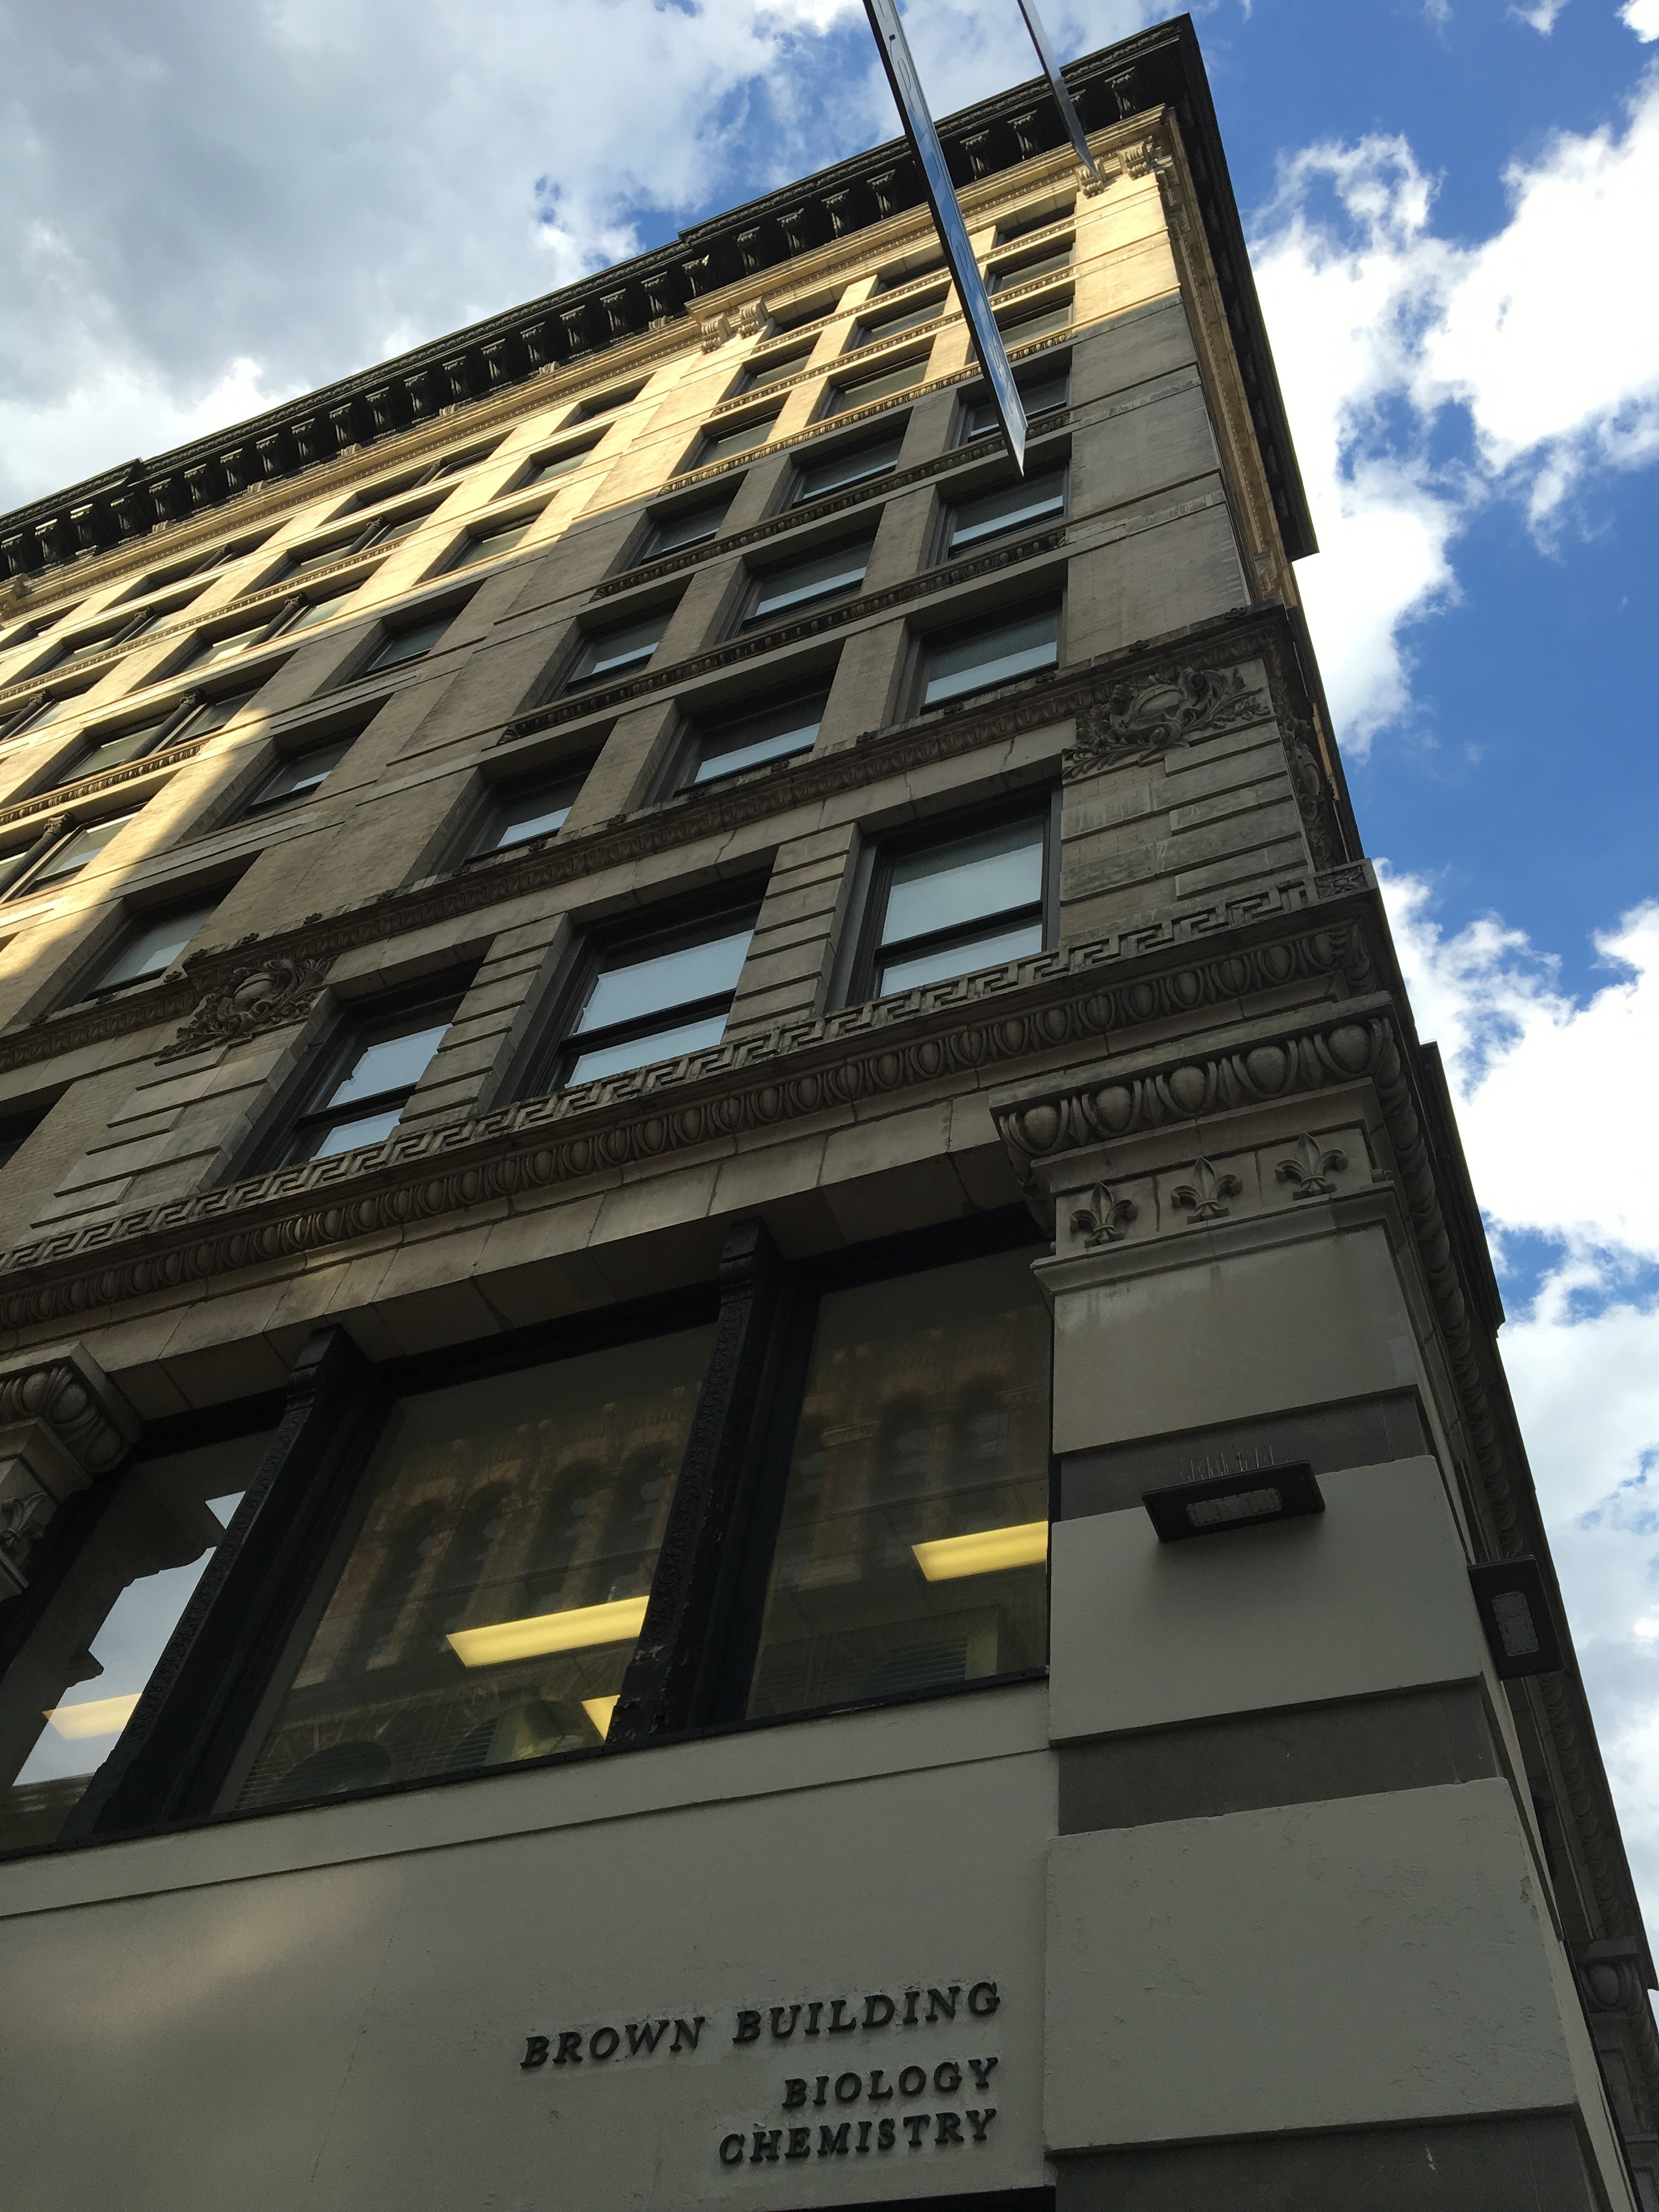 Triangle Shirtwaist Soundwalk introductory research